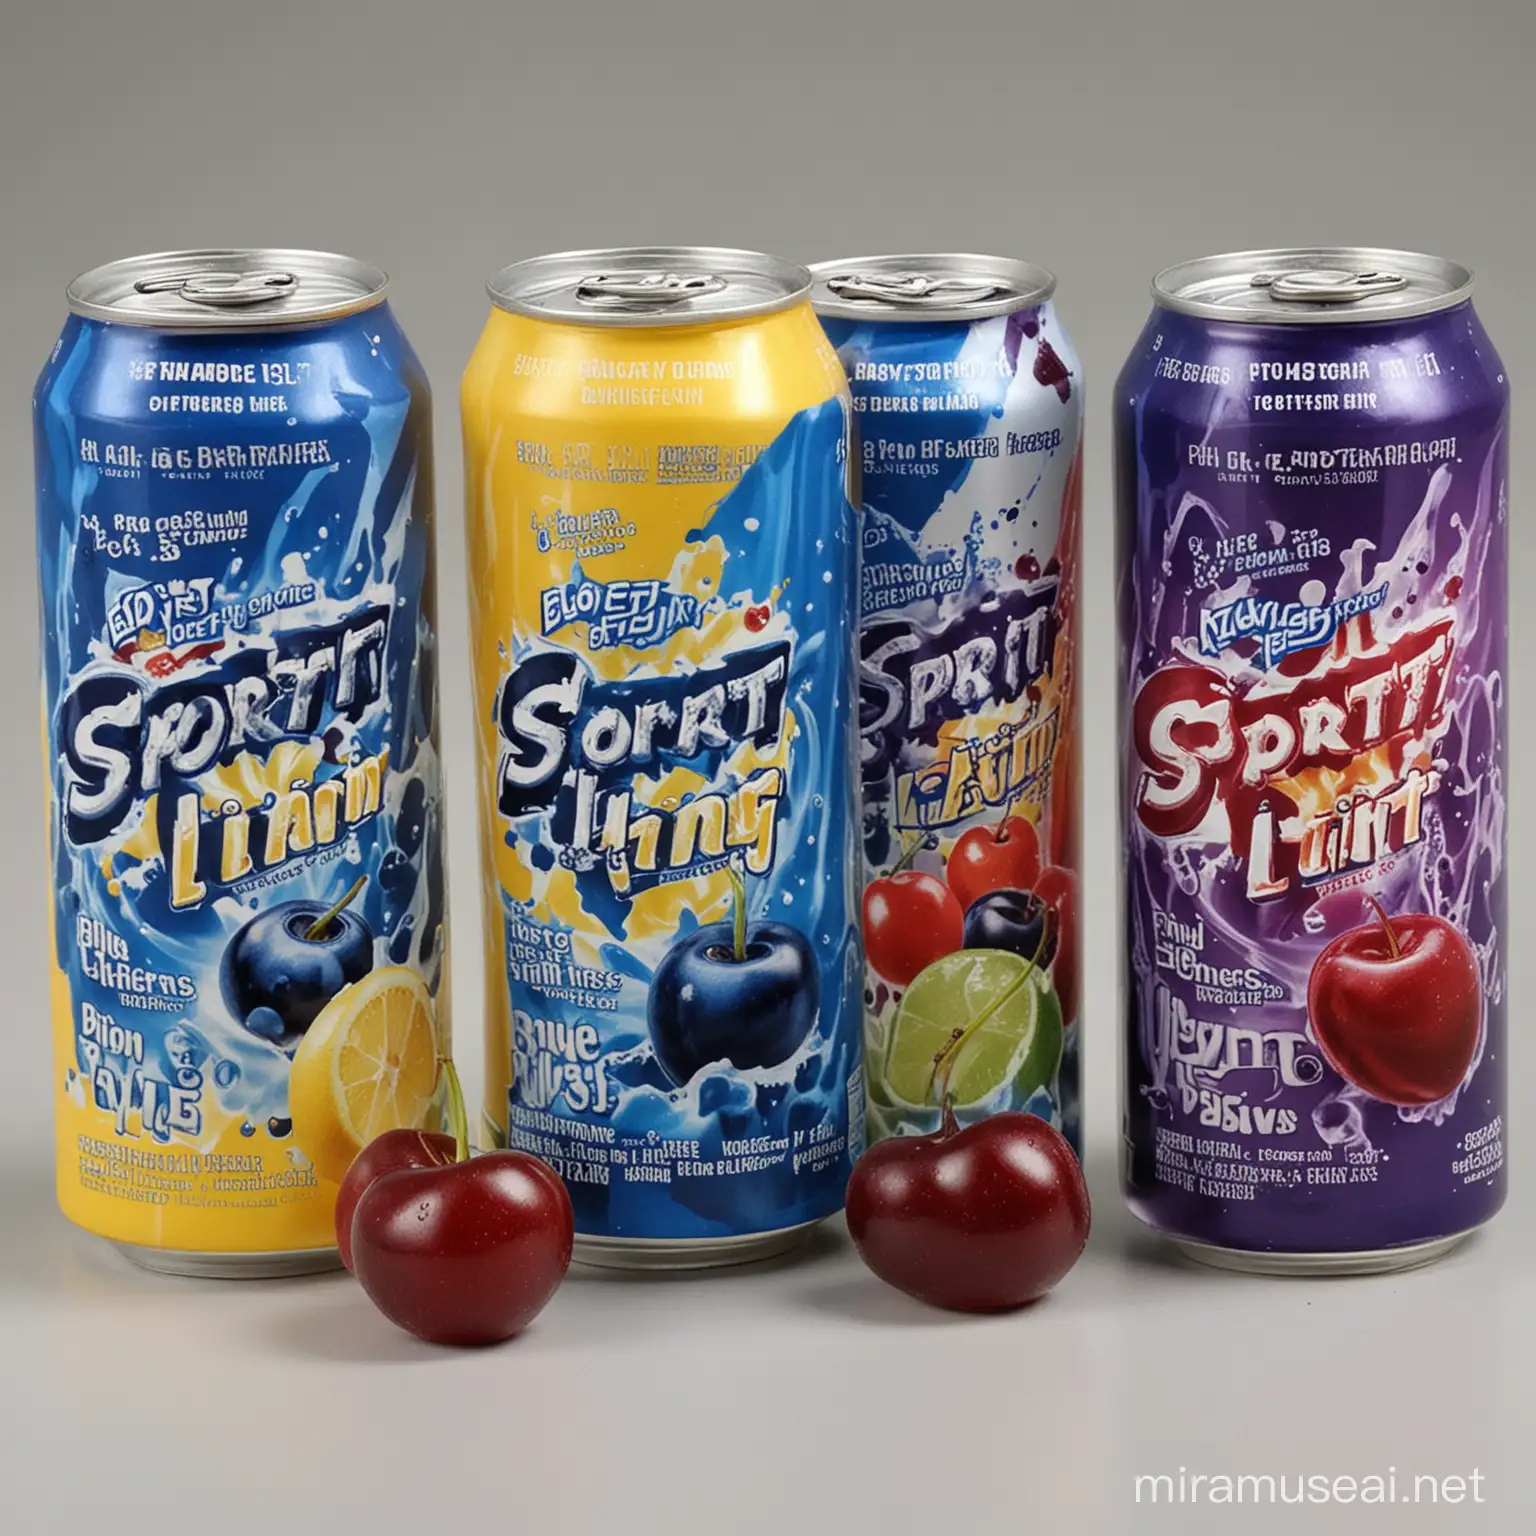 I am advertising a drink named 'SportFit'. There are three flavors, first one names 'Blue Lightning' which is blueberries flavor. The second one names 'Blast' which is lemon flavor. The third one names 'Glacier Blitz' which is cherries flavor, but the color of this one is white. Please generate four pictures for commercials, one for each flavor, and one for all of them together.